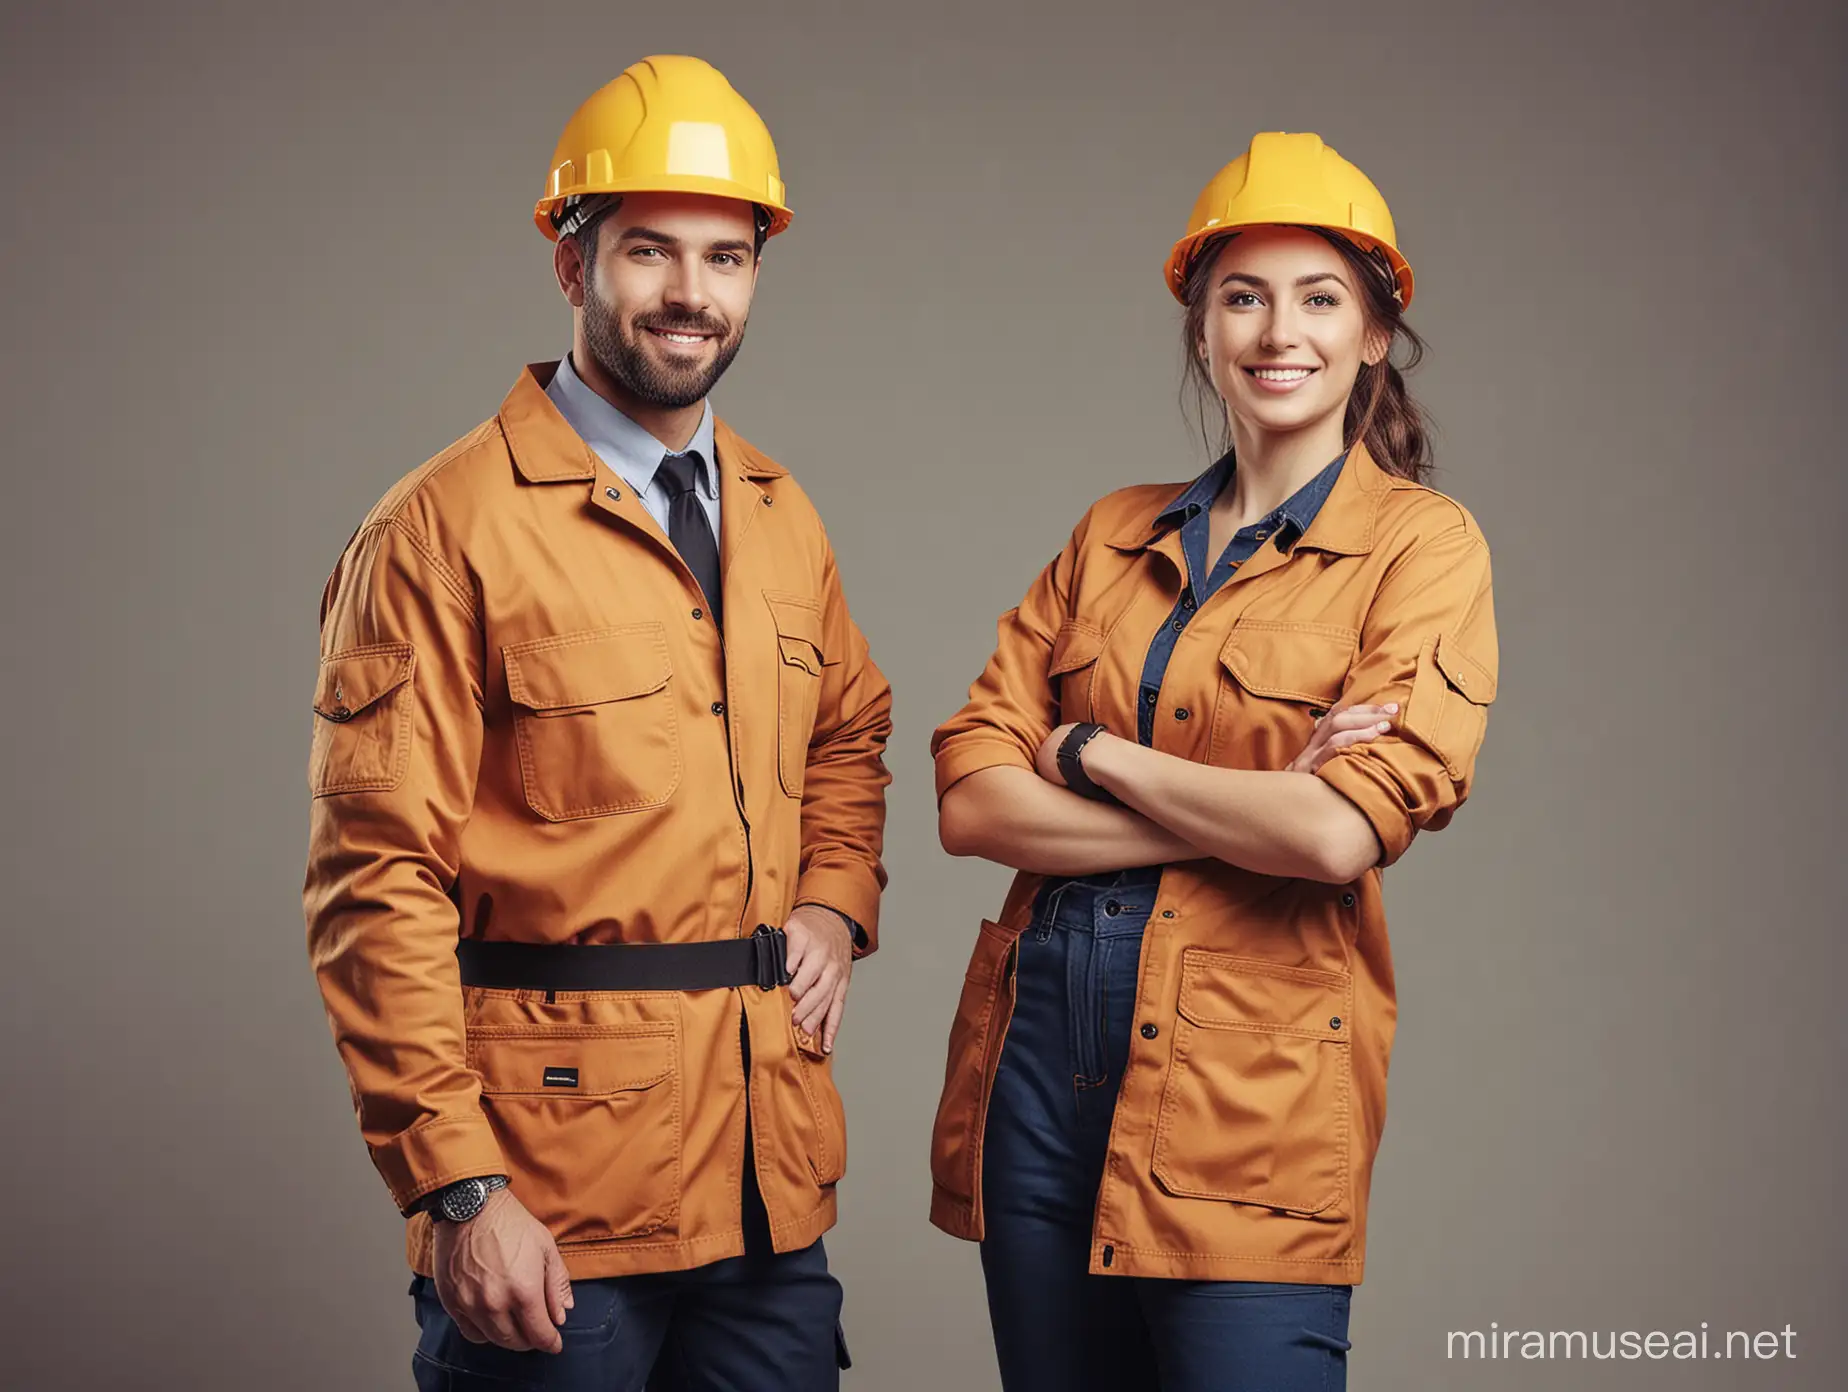 Couple in Industrial Workwear at a Machinery Factory